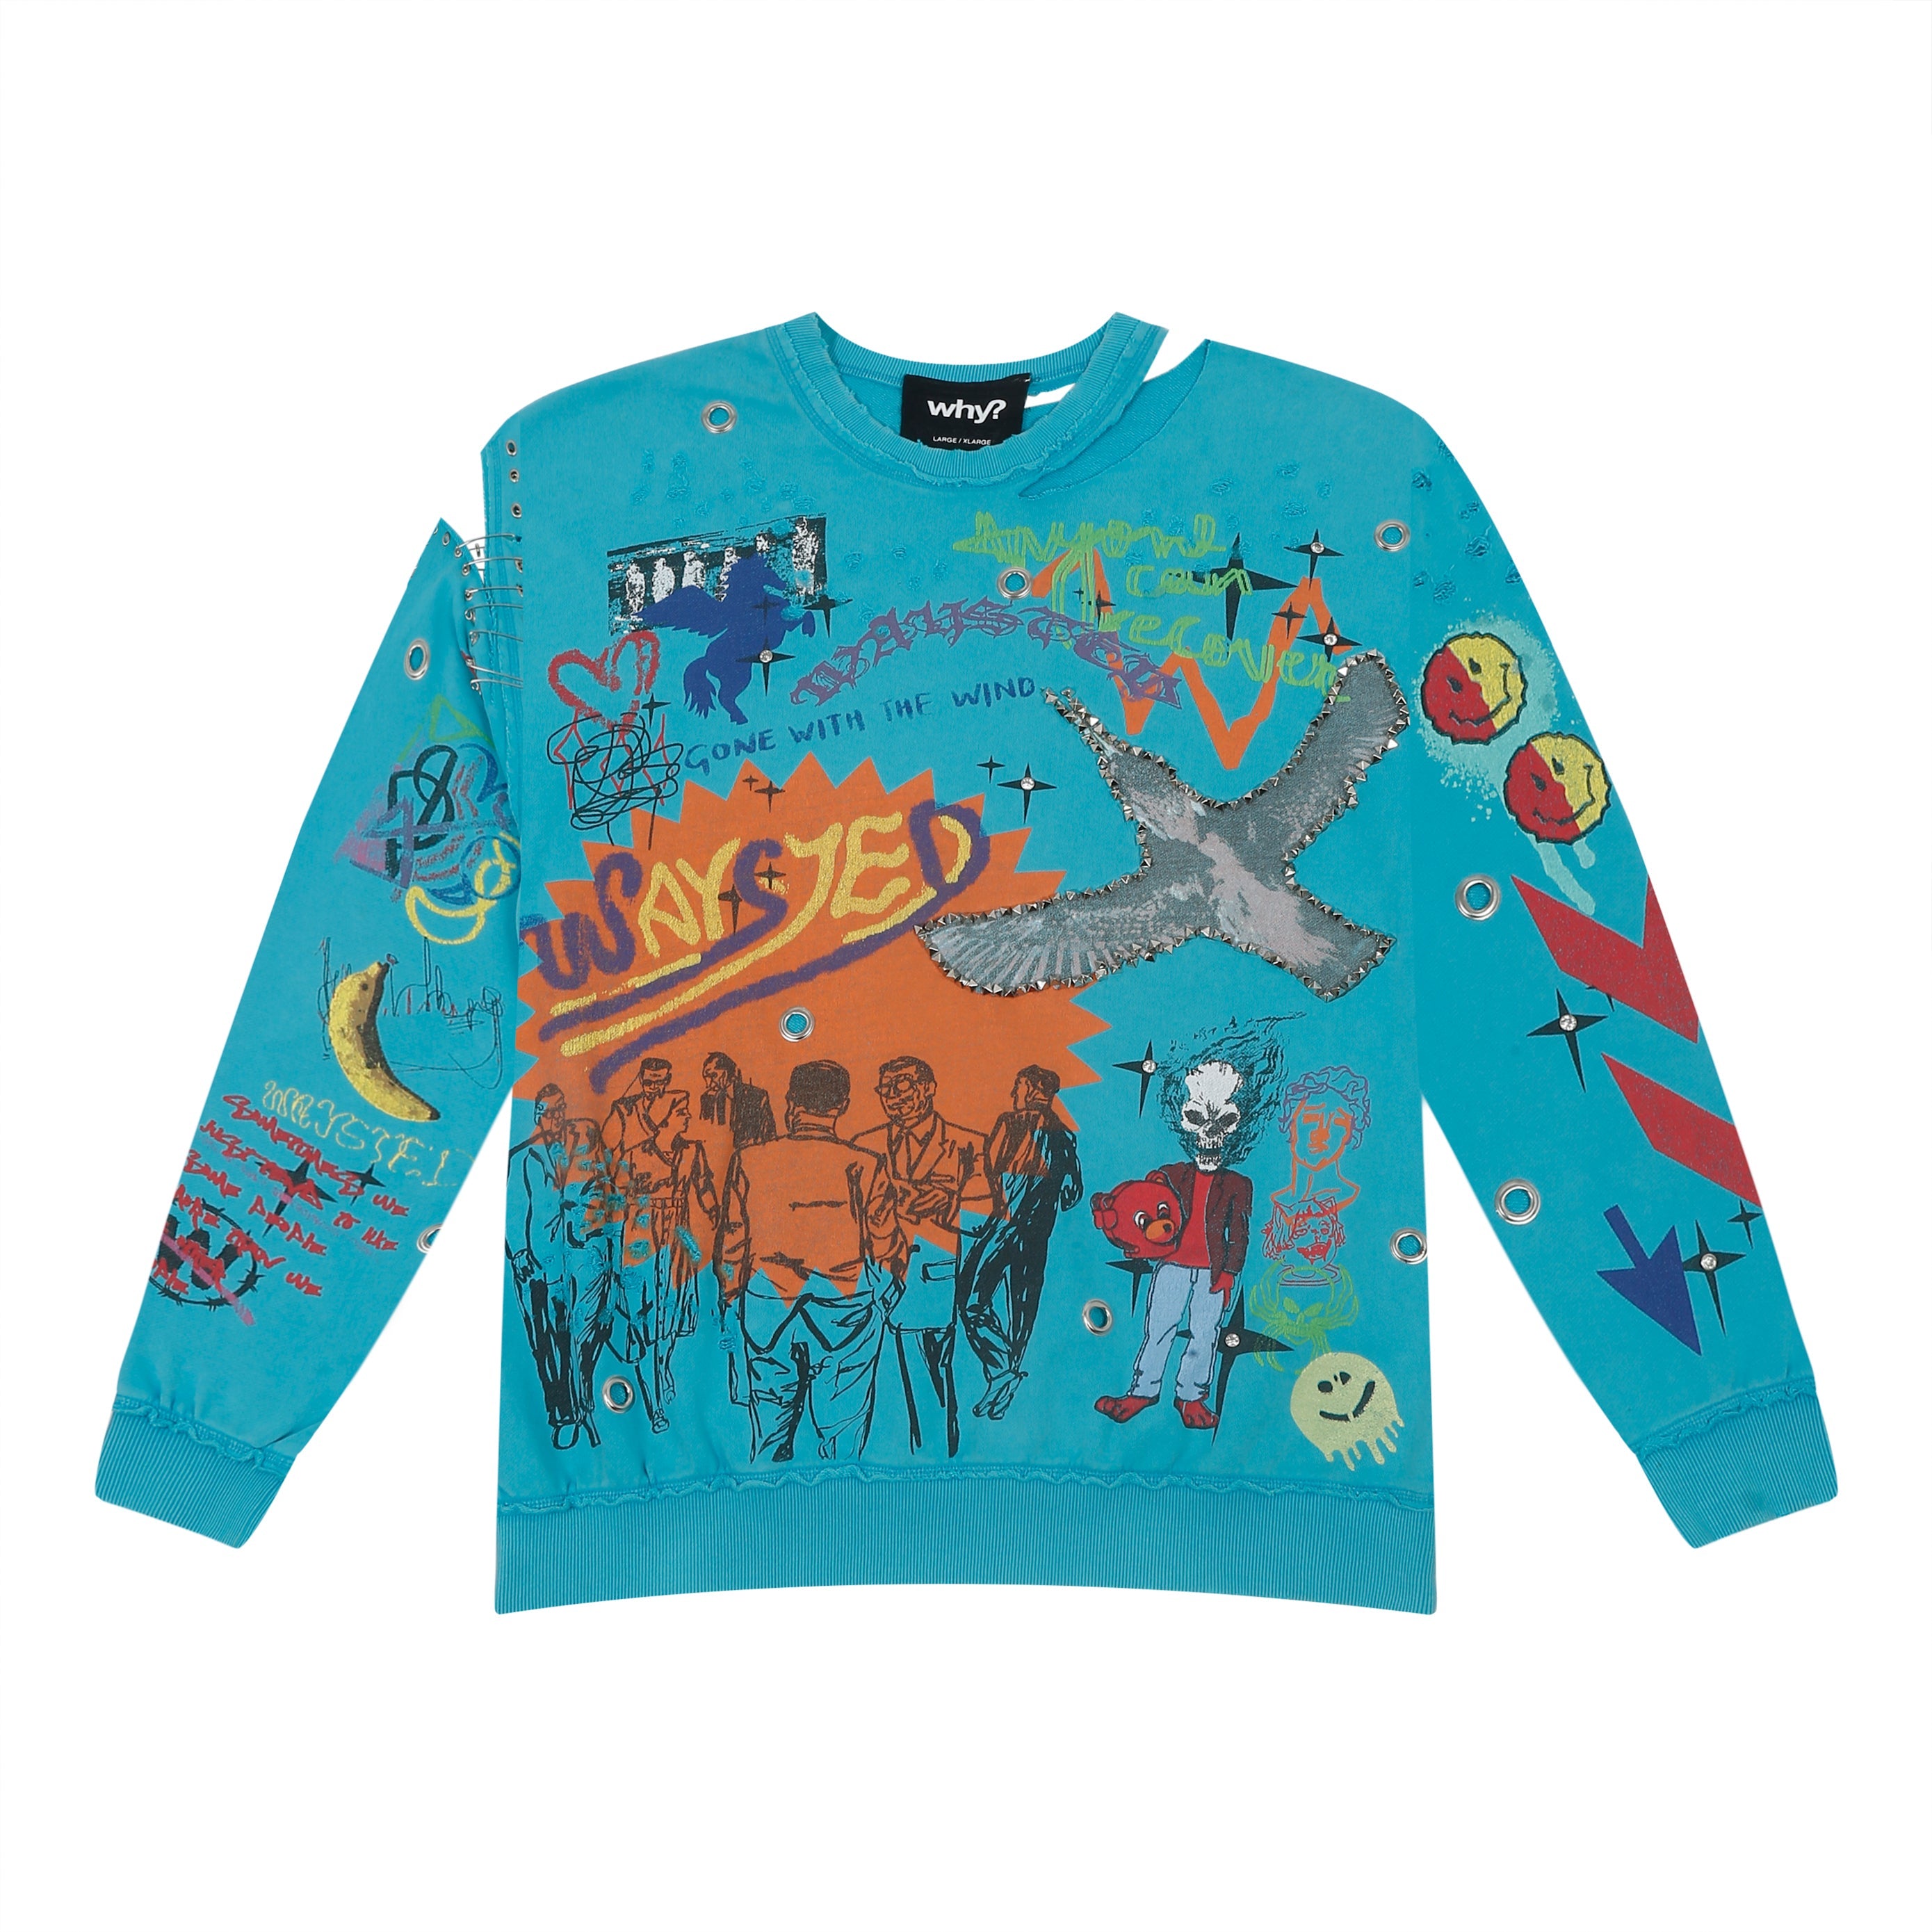 Embellished Sweatshirt - Mineral "Gone With The Wind"